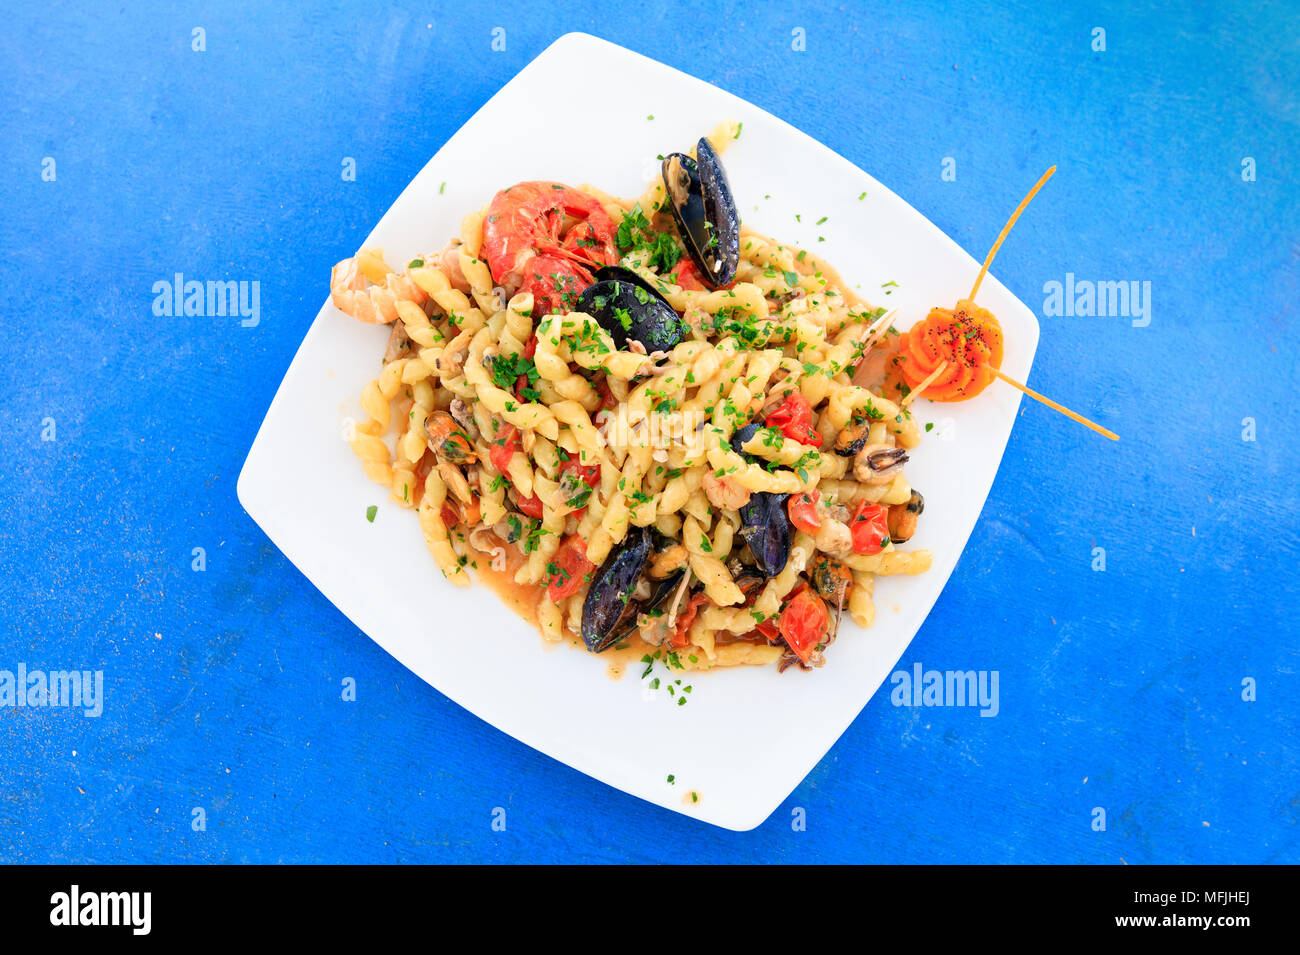 Pasta with seafood on platter, Sicily, Italy, Europe Stock Photo